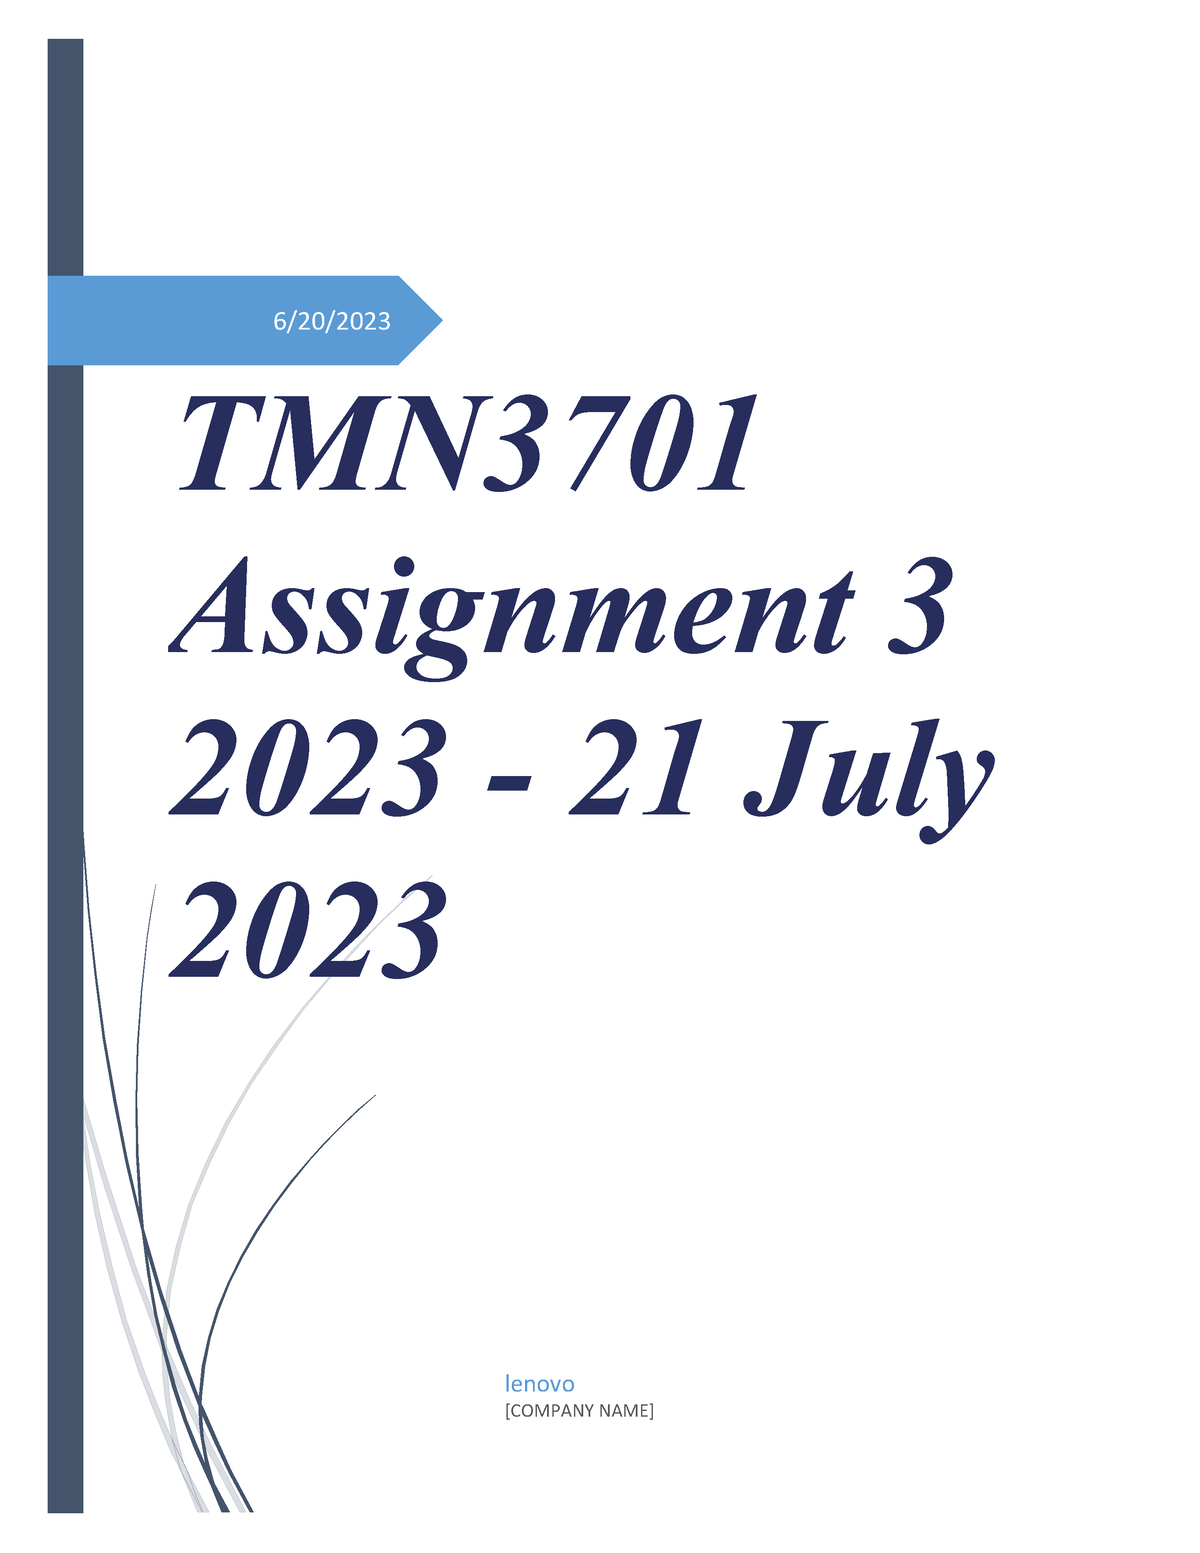 tmn3701 assignment 3 answers